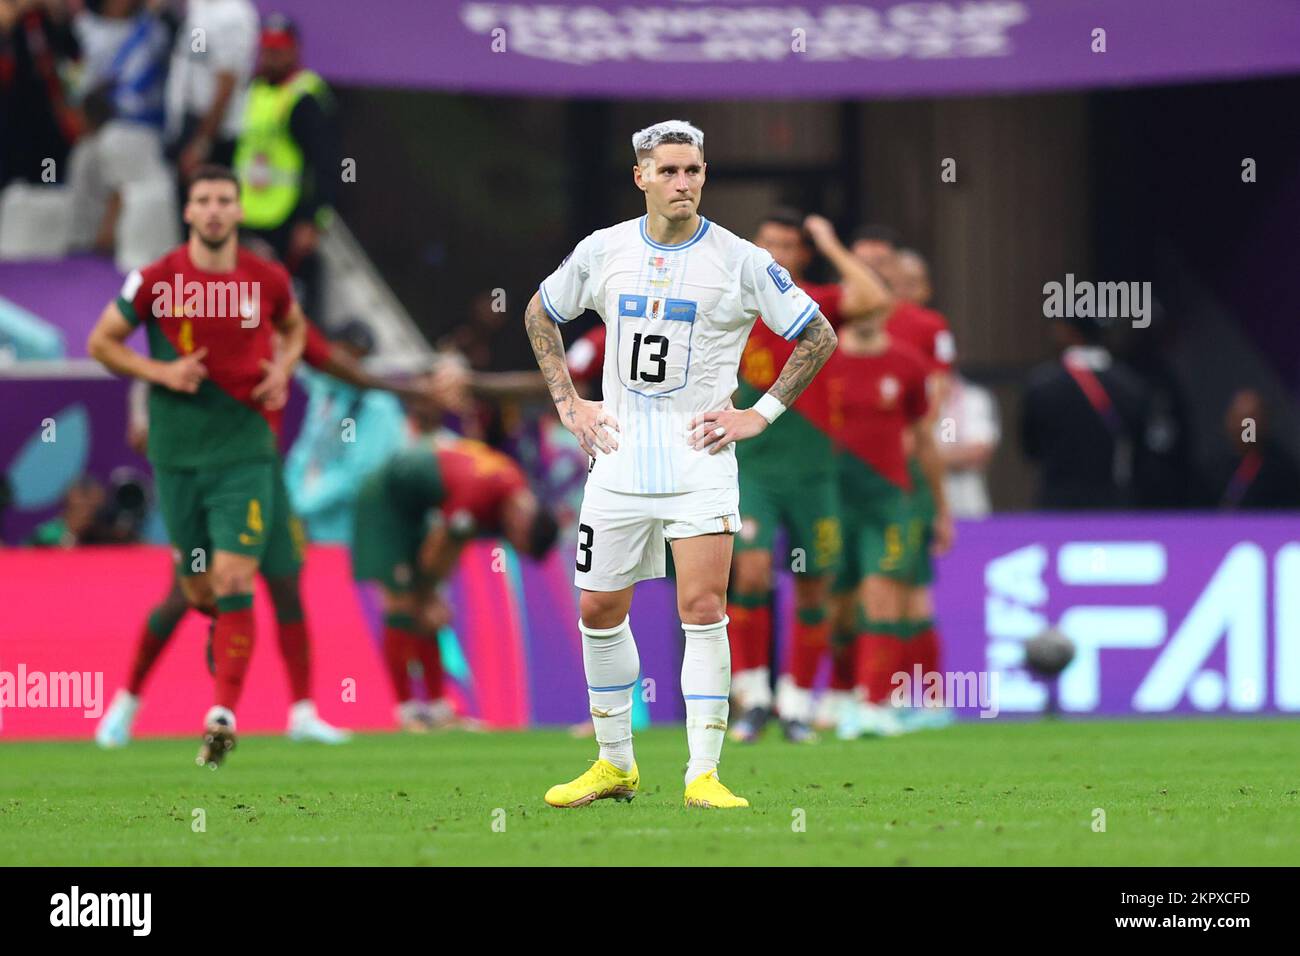 Lusail, Qatar. 28th Nov, 2022. Soccer, Qatar 2022 World Cup, Portugal - Uruguay, Preliminary Round, Group H, Matchday 2, Lusail Stadium, Uruguay's Guillermo Varela stands on the pitch as Portugal players (back) cheer. Credit: Tom Weller/dpa/Alamy Live News Stock Photo